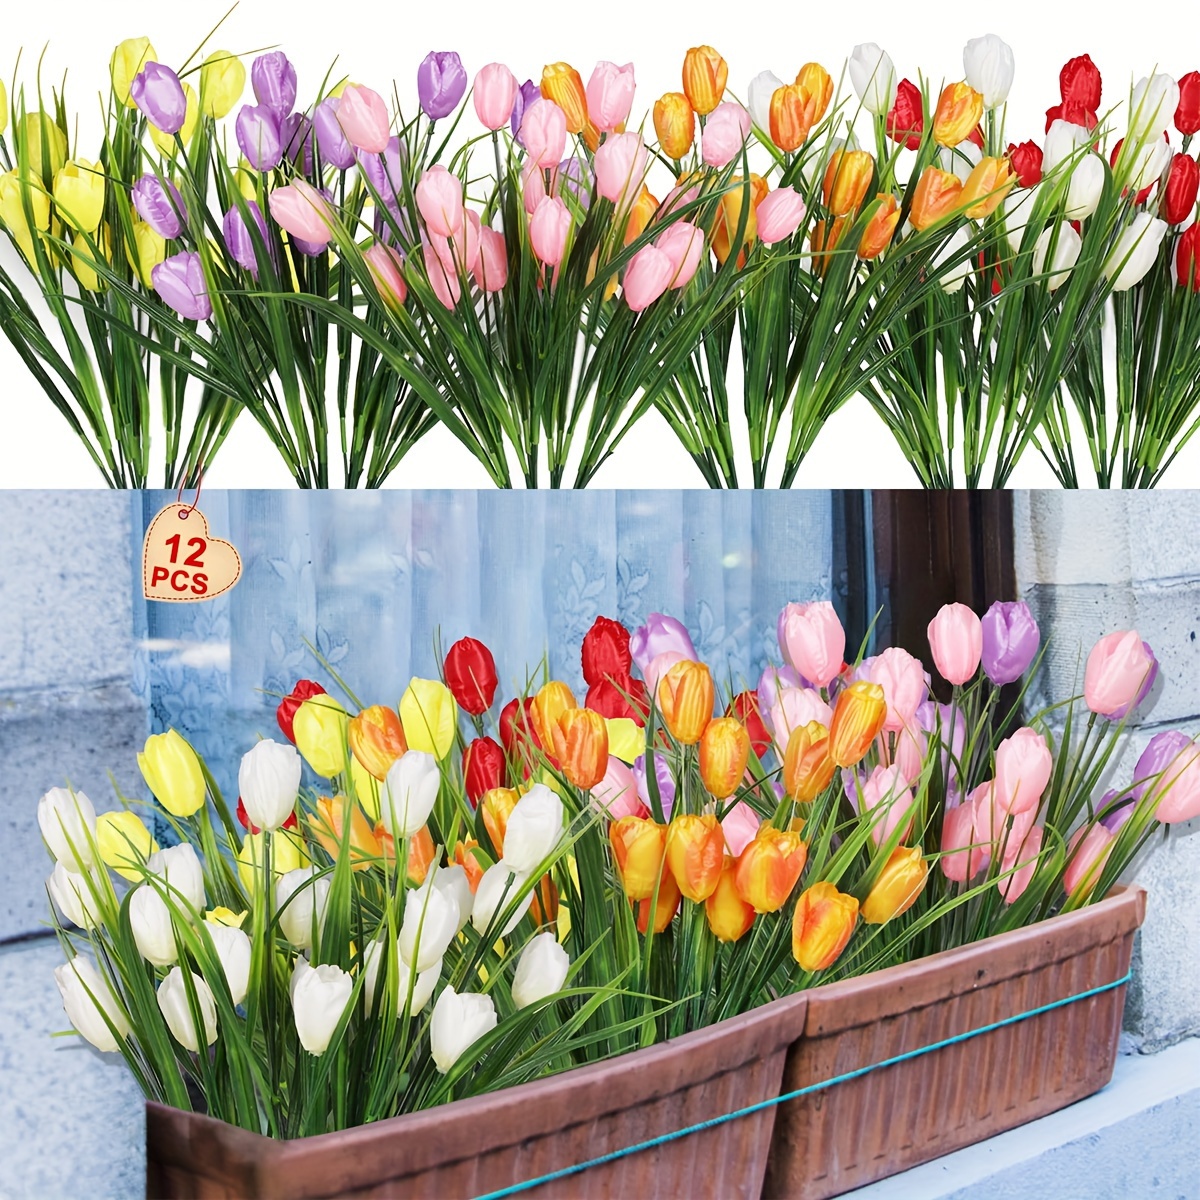 

12 Bundles Artificial Tulips Outdoor Fake Tulips Flowers Mixed Colors Real Feel Flowers Greenery Plants For Home Windowbox Porch Garden Farmhouse Barn Decor